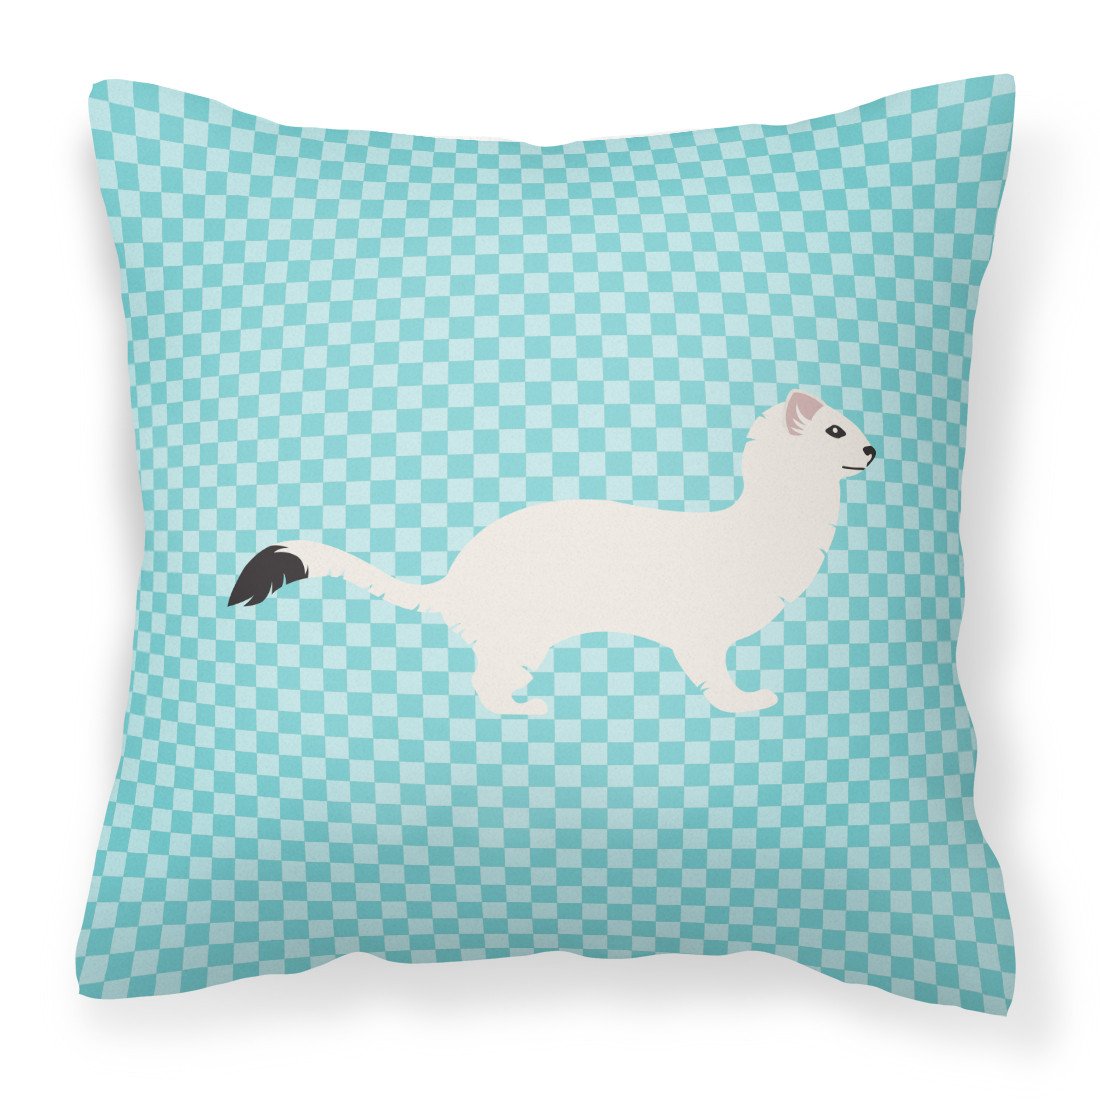 Stoat Short-tailed Weasel Blue Check Fabric Decorative Pillow BB8046PW1818 by Caroline's Treasures